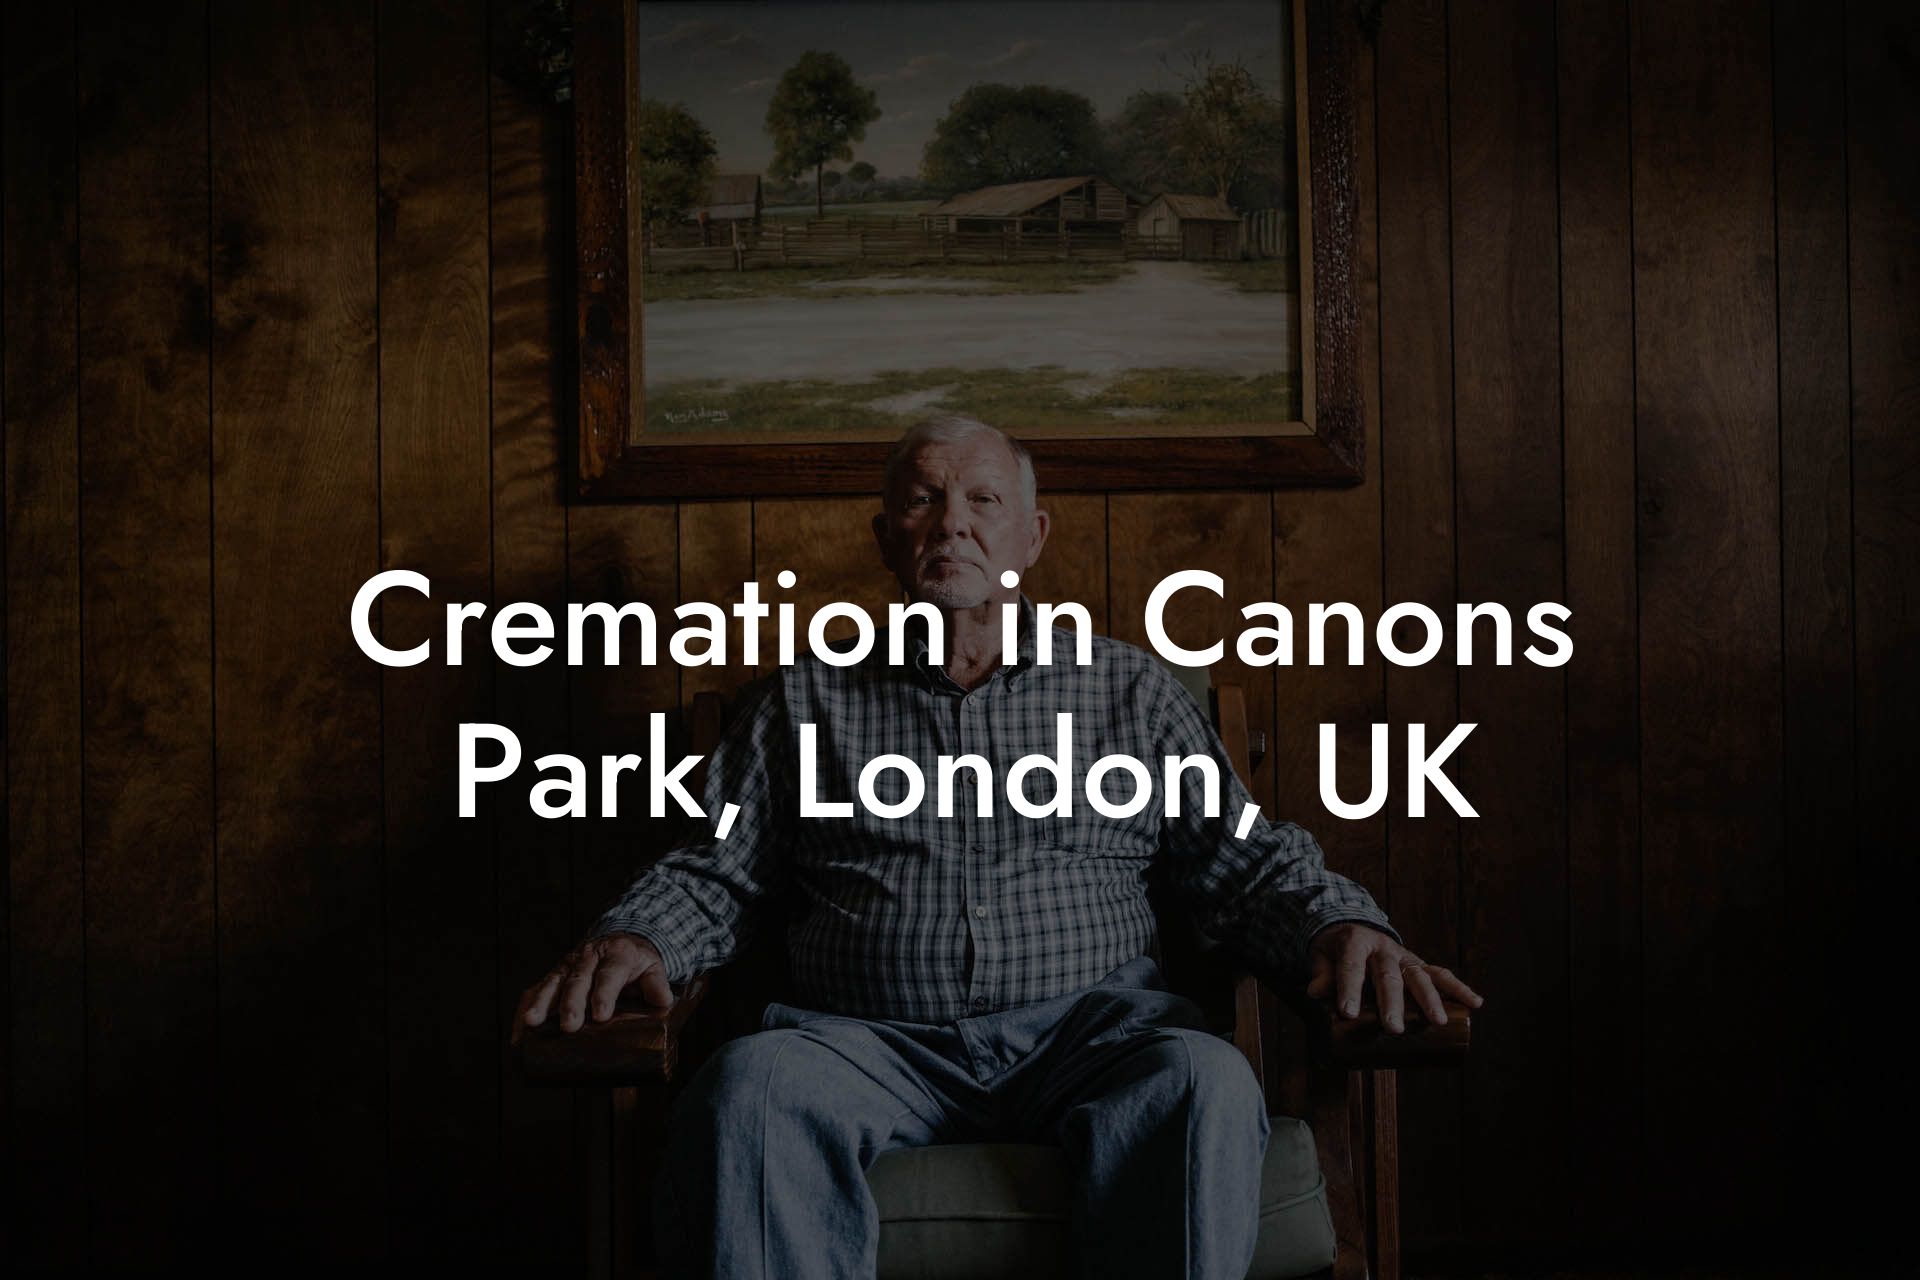 Cremation in Canons Park, London, UK